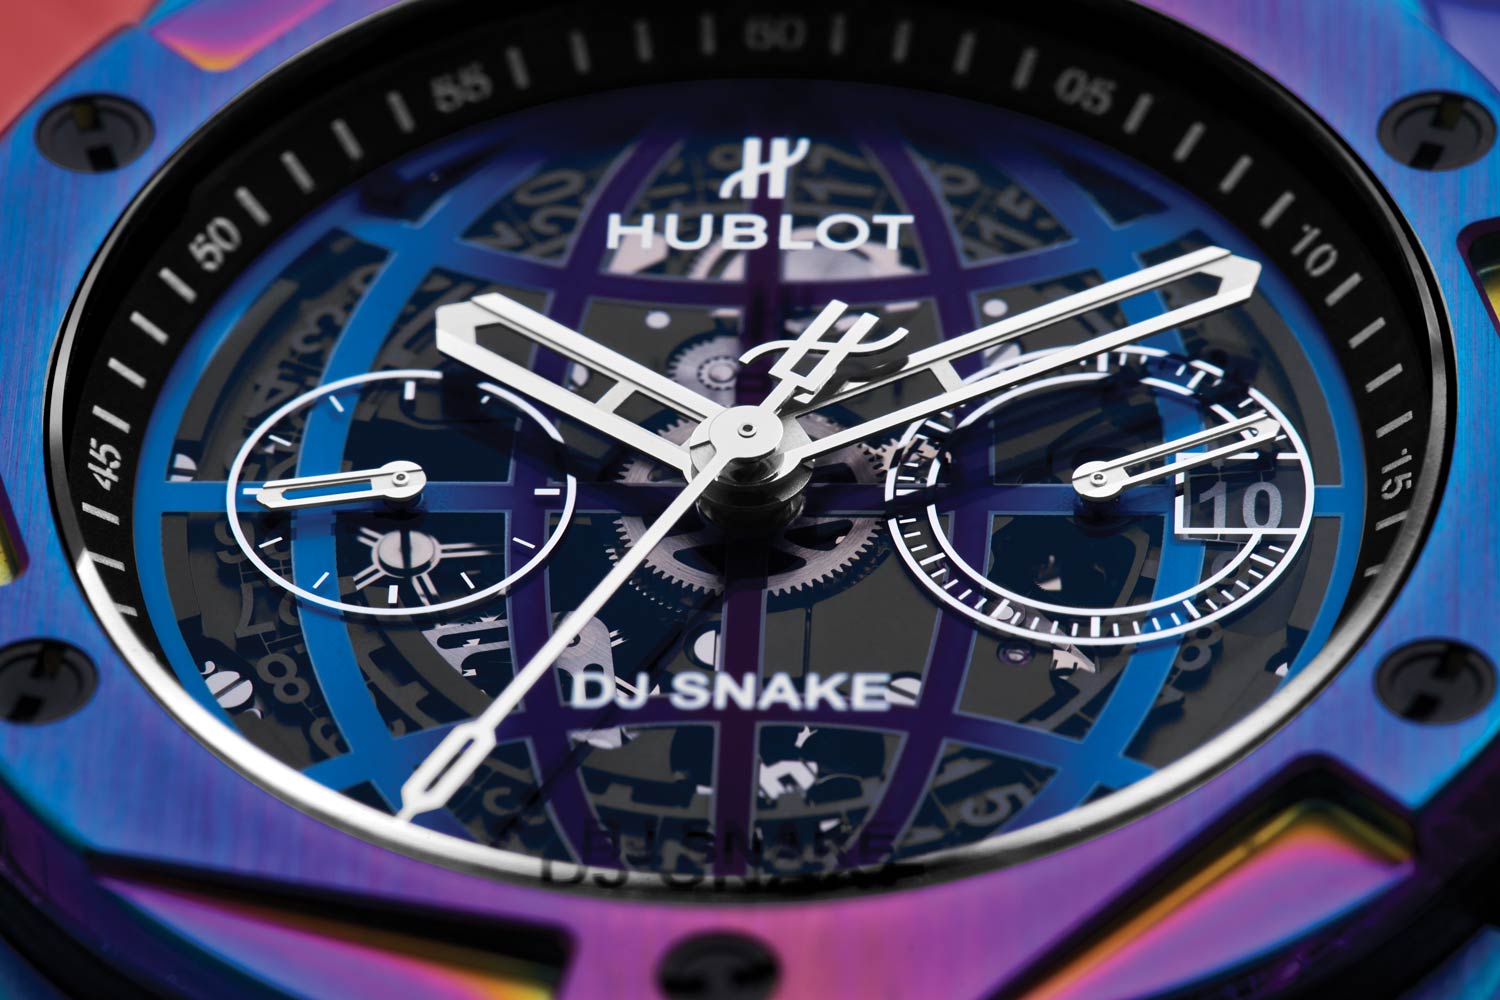 The globe on the dial represents global presence of DJ Snake's music and travels